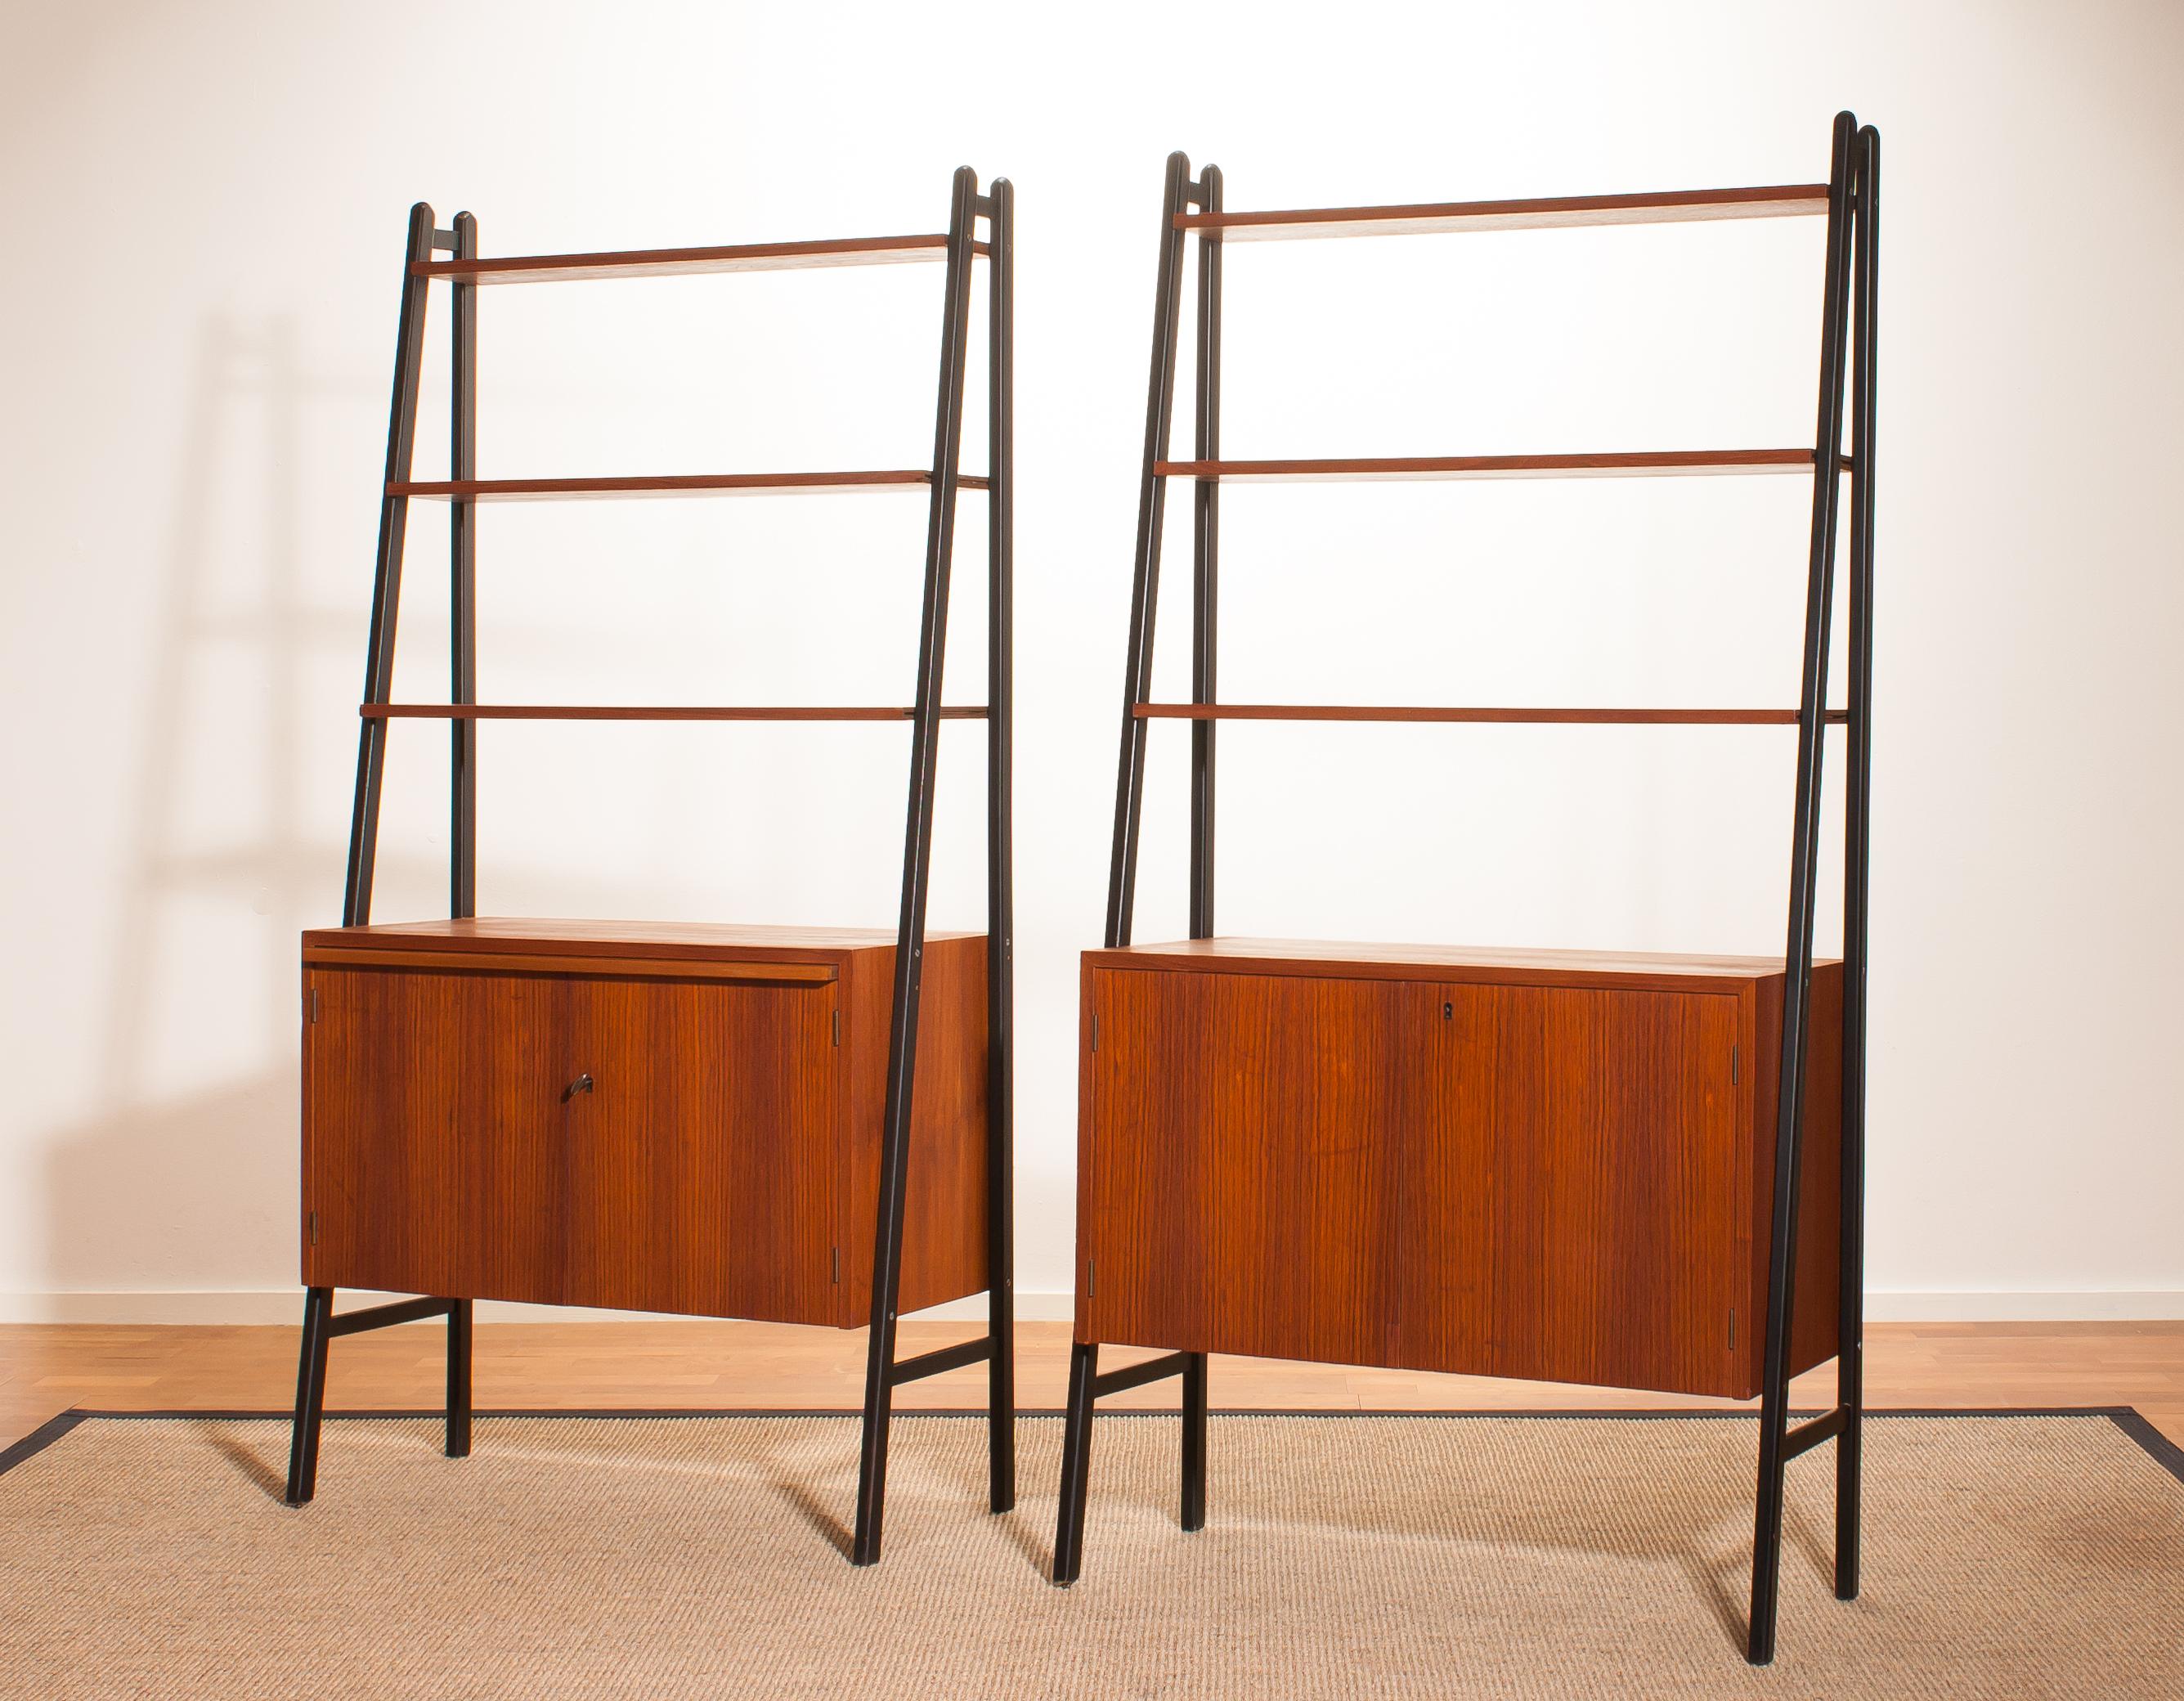 Two beautiful cabinets made of teak with black stands.
Because the cupboard is pretty slim and open to form it is also very suitable to use it as a room divider.
Each cabinet contains three shelves and a two-door cabinet.
One of the cabinets has